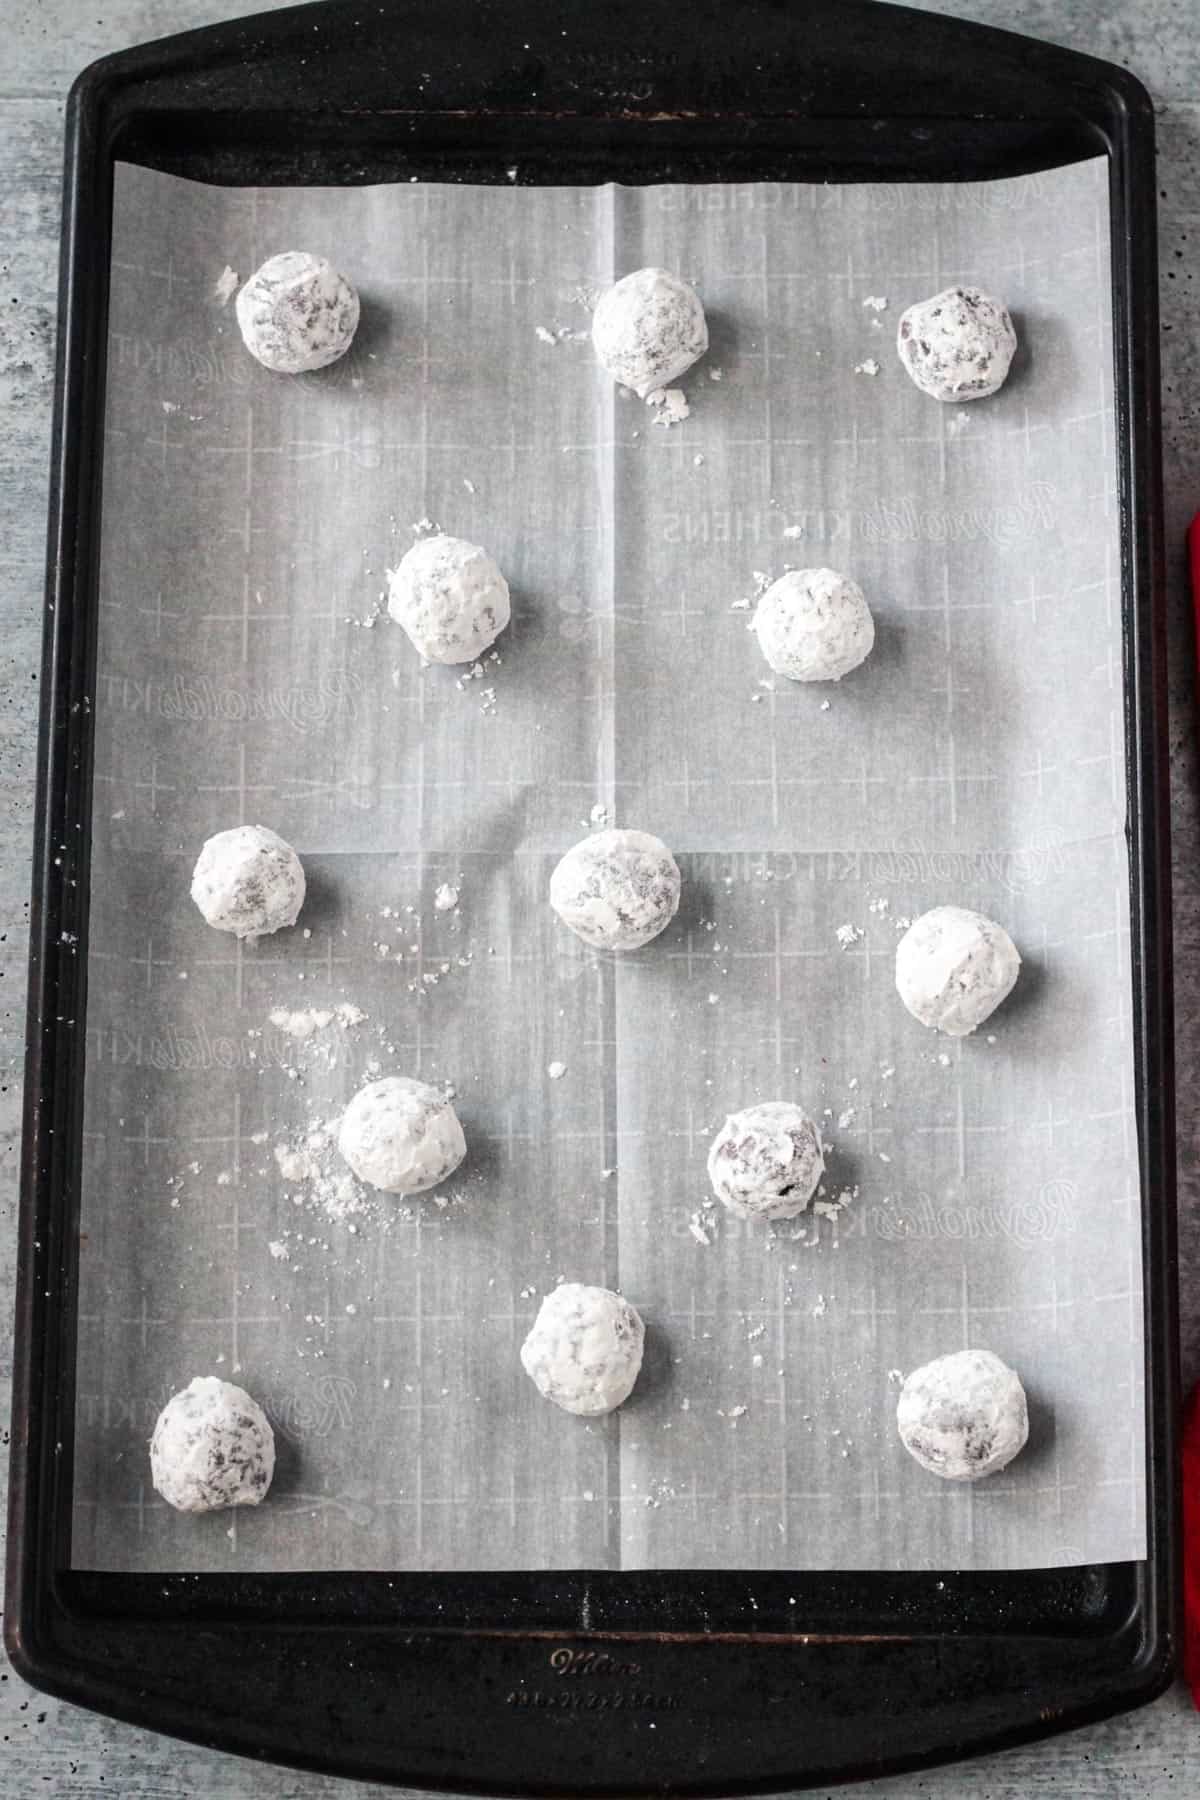 Dough balls coated in powdered sugar spaced out on a cookie sheet.